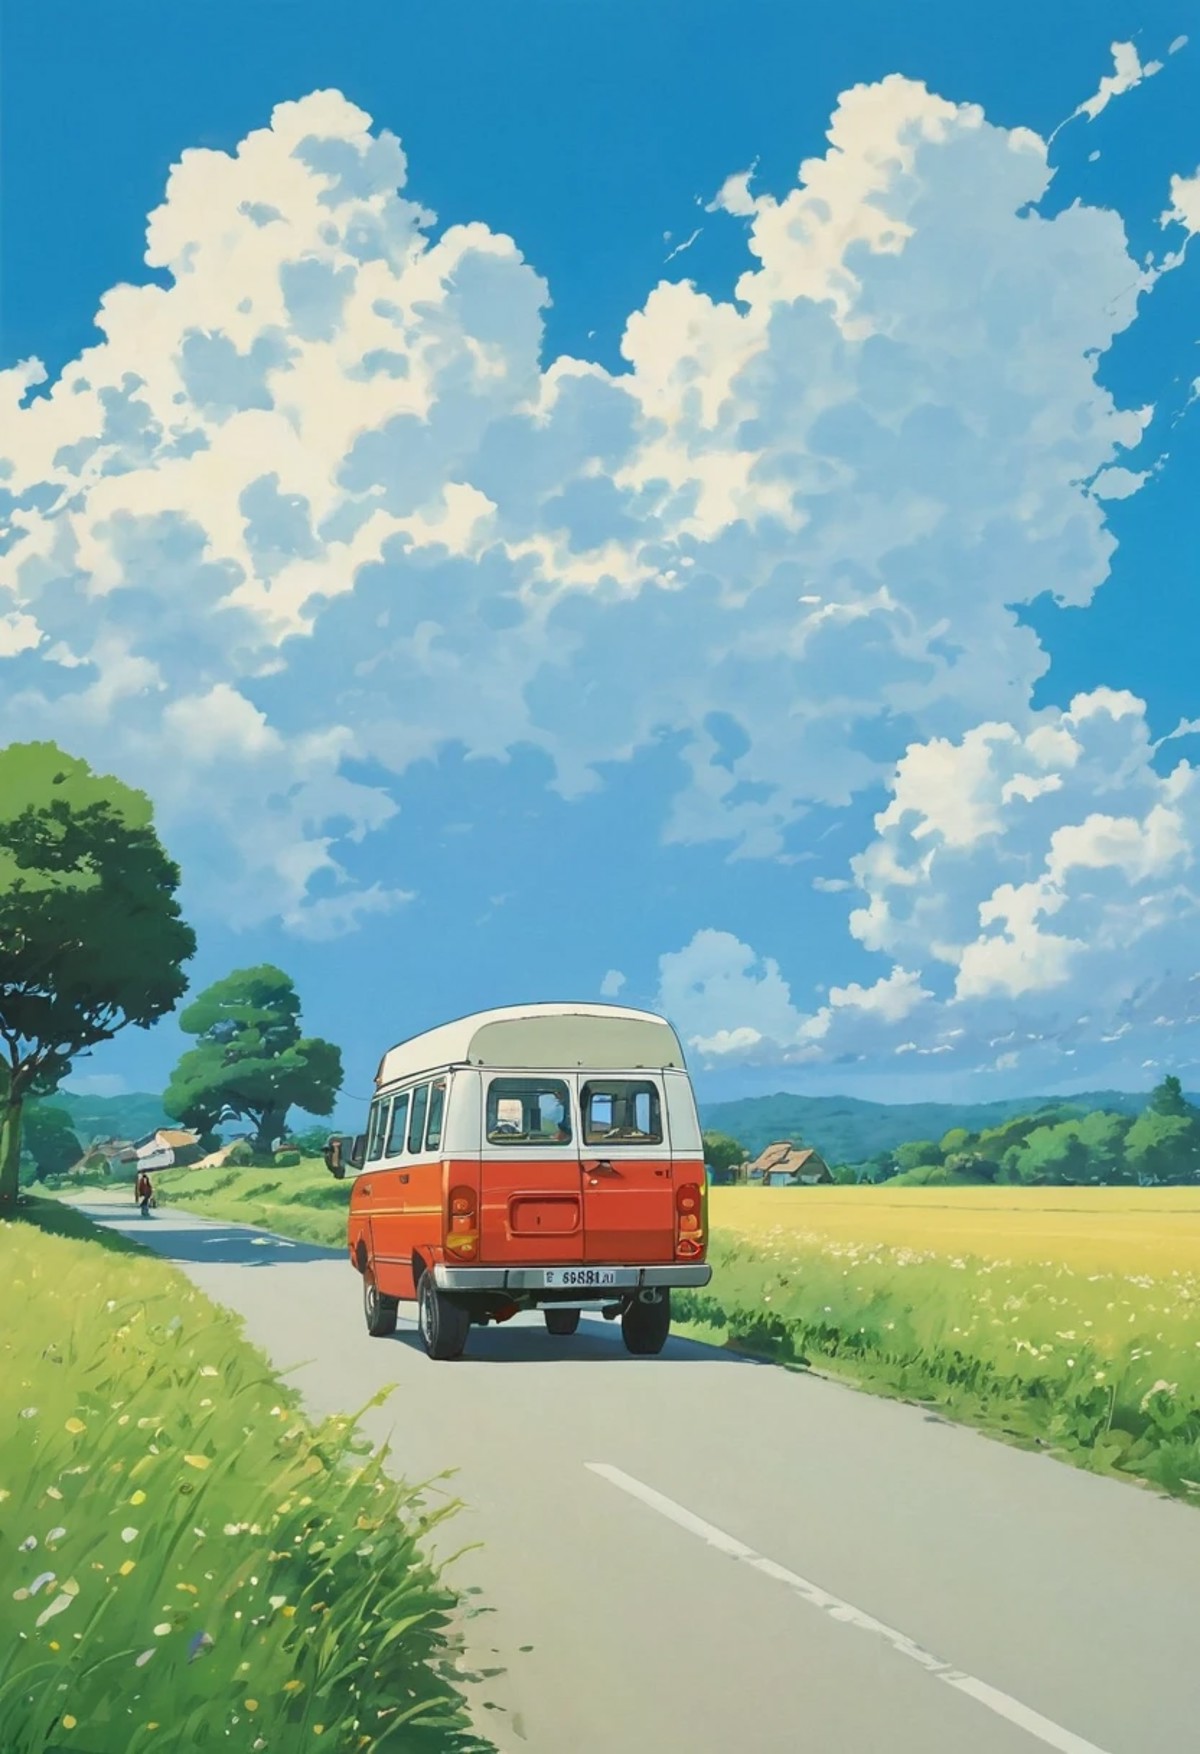 A sunny day under a blue sky dotted with white clouds. A red van is seen journeying down a narrow road that cuts through lush green fields sprinkled with patches of yellow flowers. In the distance, rolling hills and a few scattered houses paint a serene rural setting. 